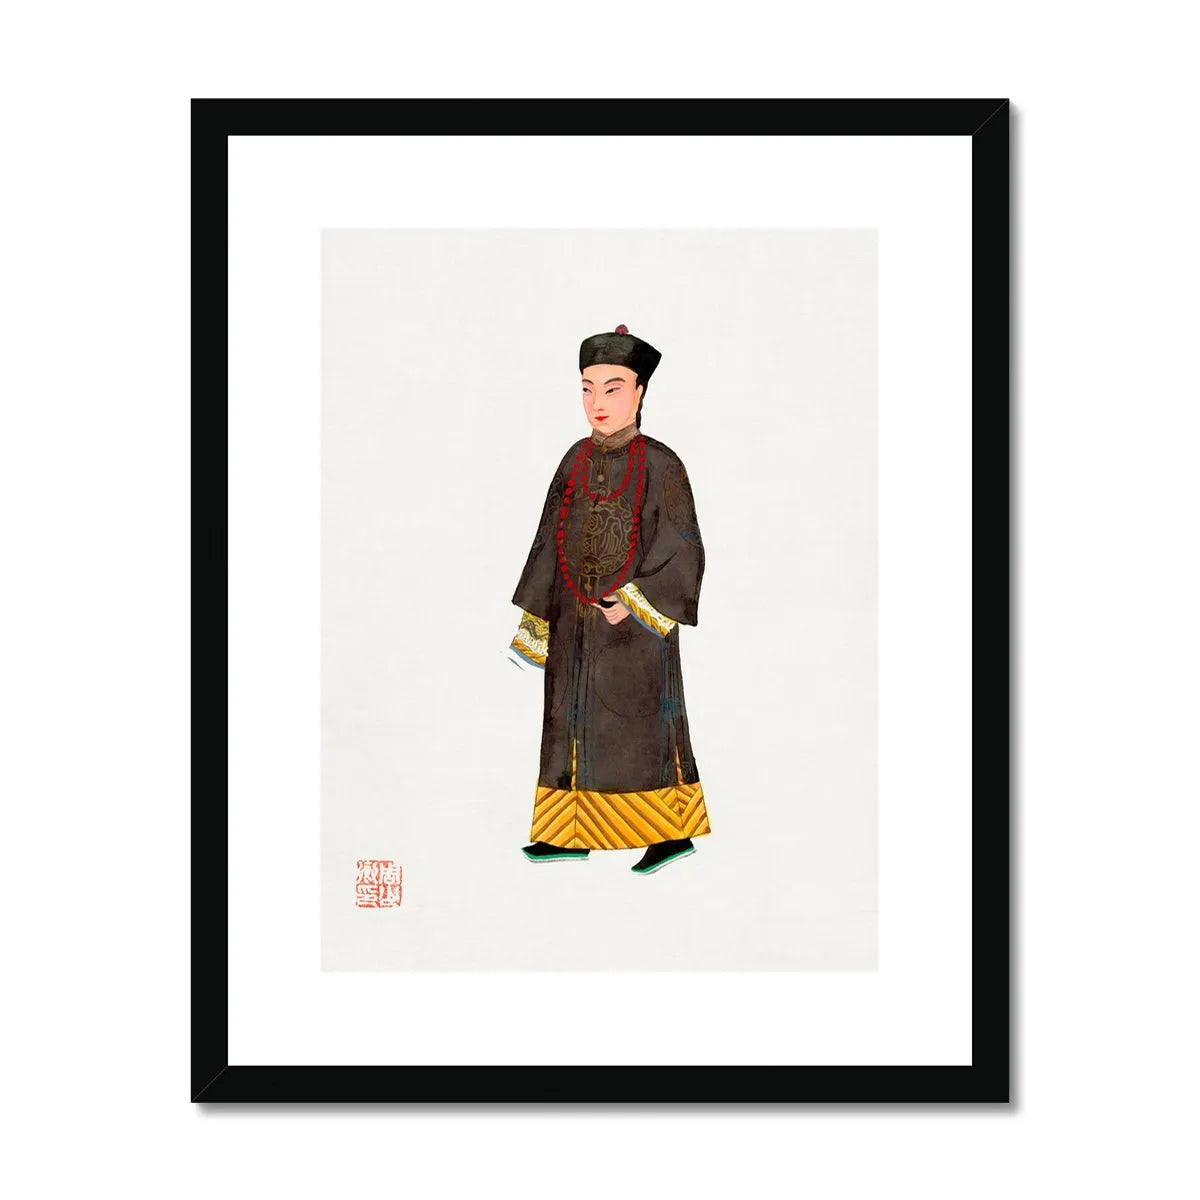 Chinese Emperor’s Courtier Framed & Mounted Print - 16’x20’ / Black Frame - Posters Prints & Visual Artwork